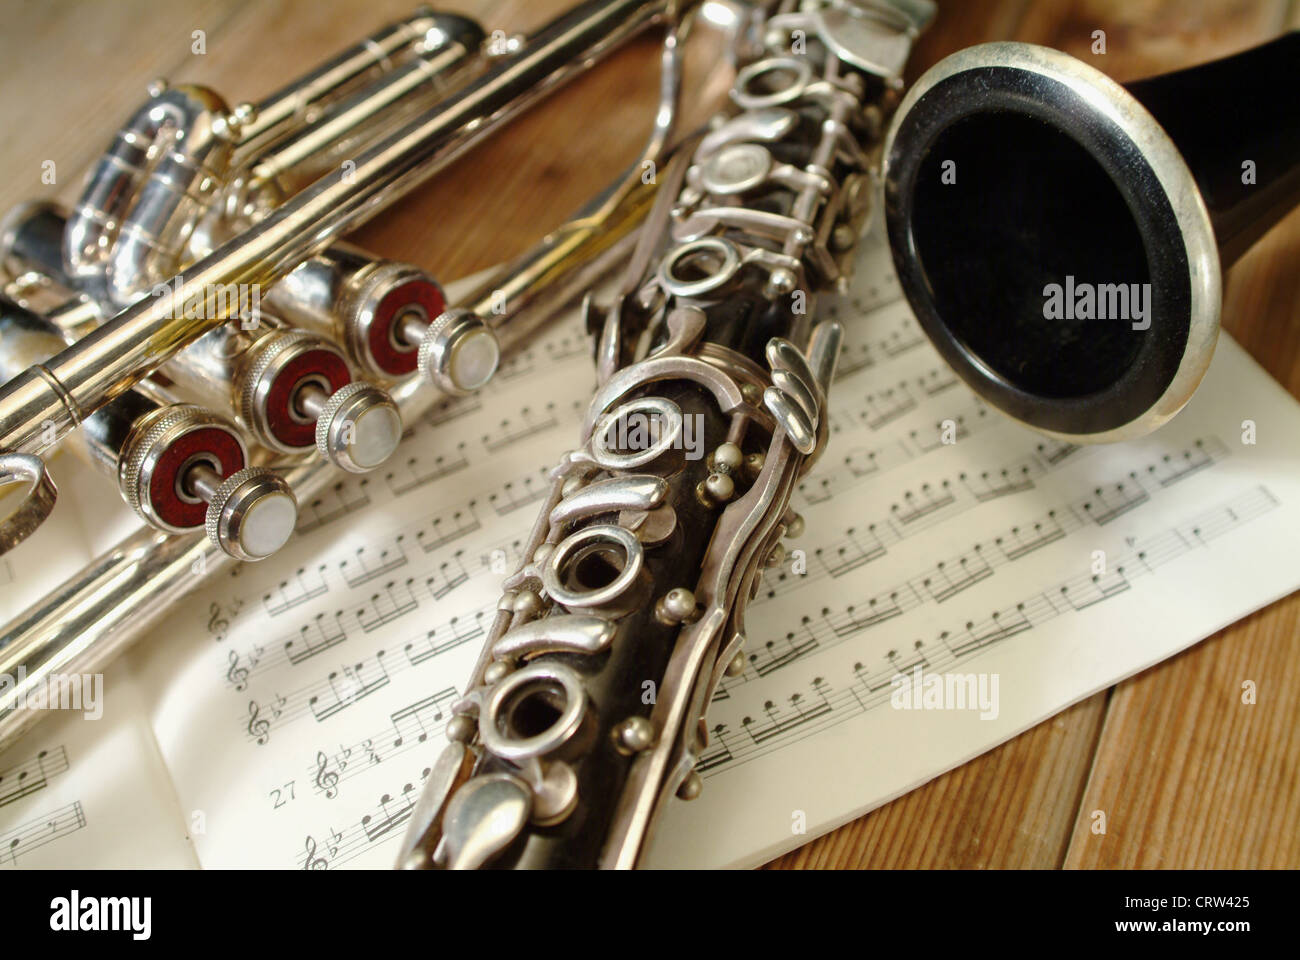 Clarinet, trumpet and notes Stock Photo